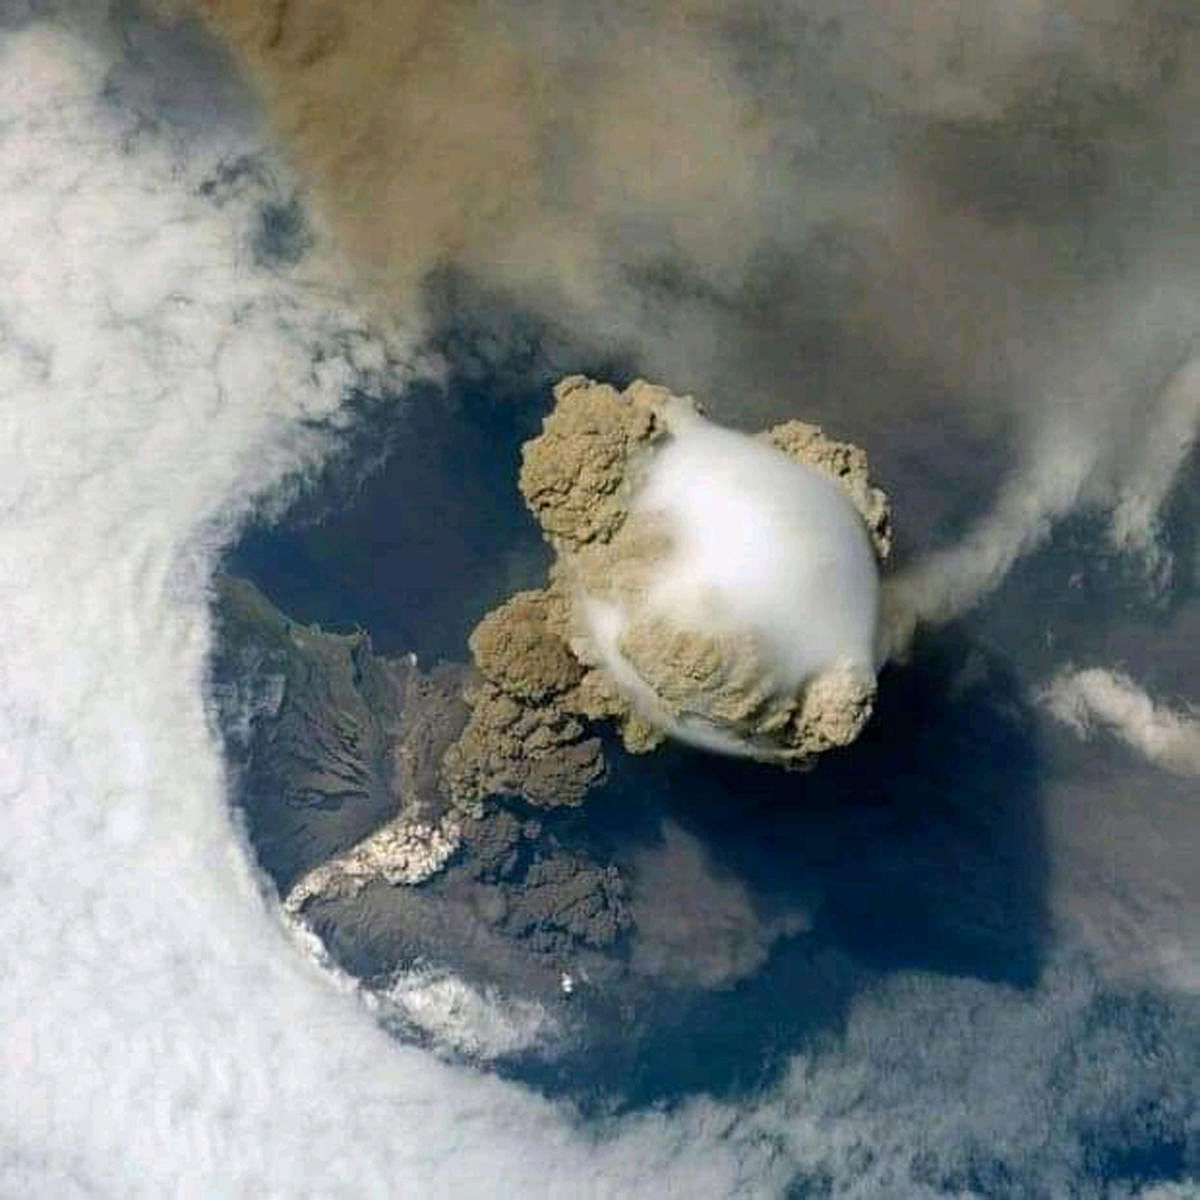 NOT SHOT BY CHANDRAYAAN-2: This is an image of Guatemala's Fuego volcano erupting, captured from space by NASA.